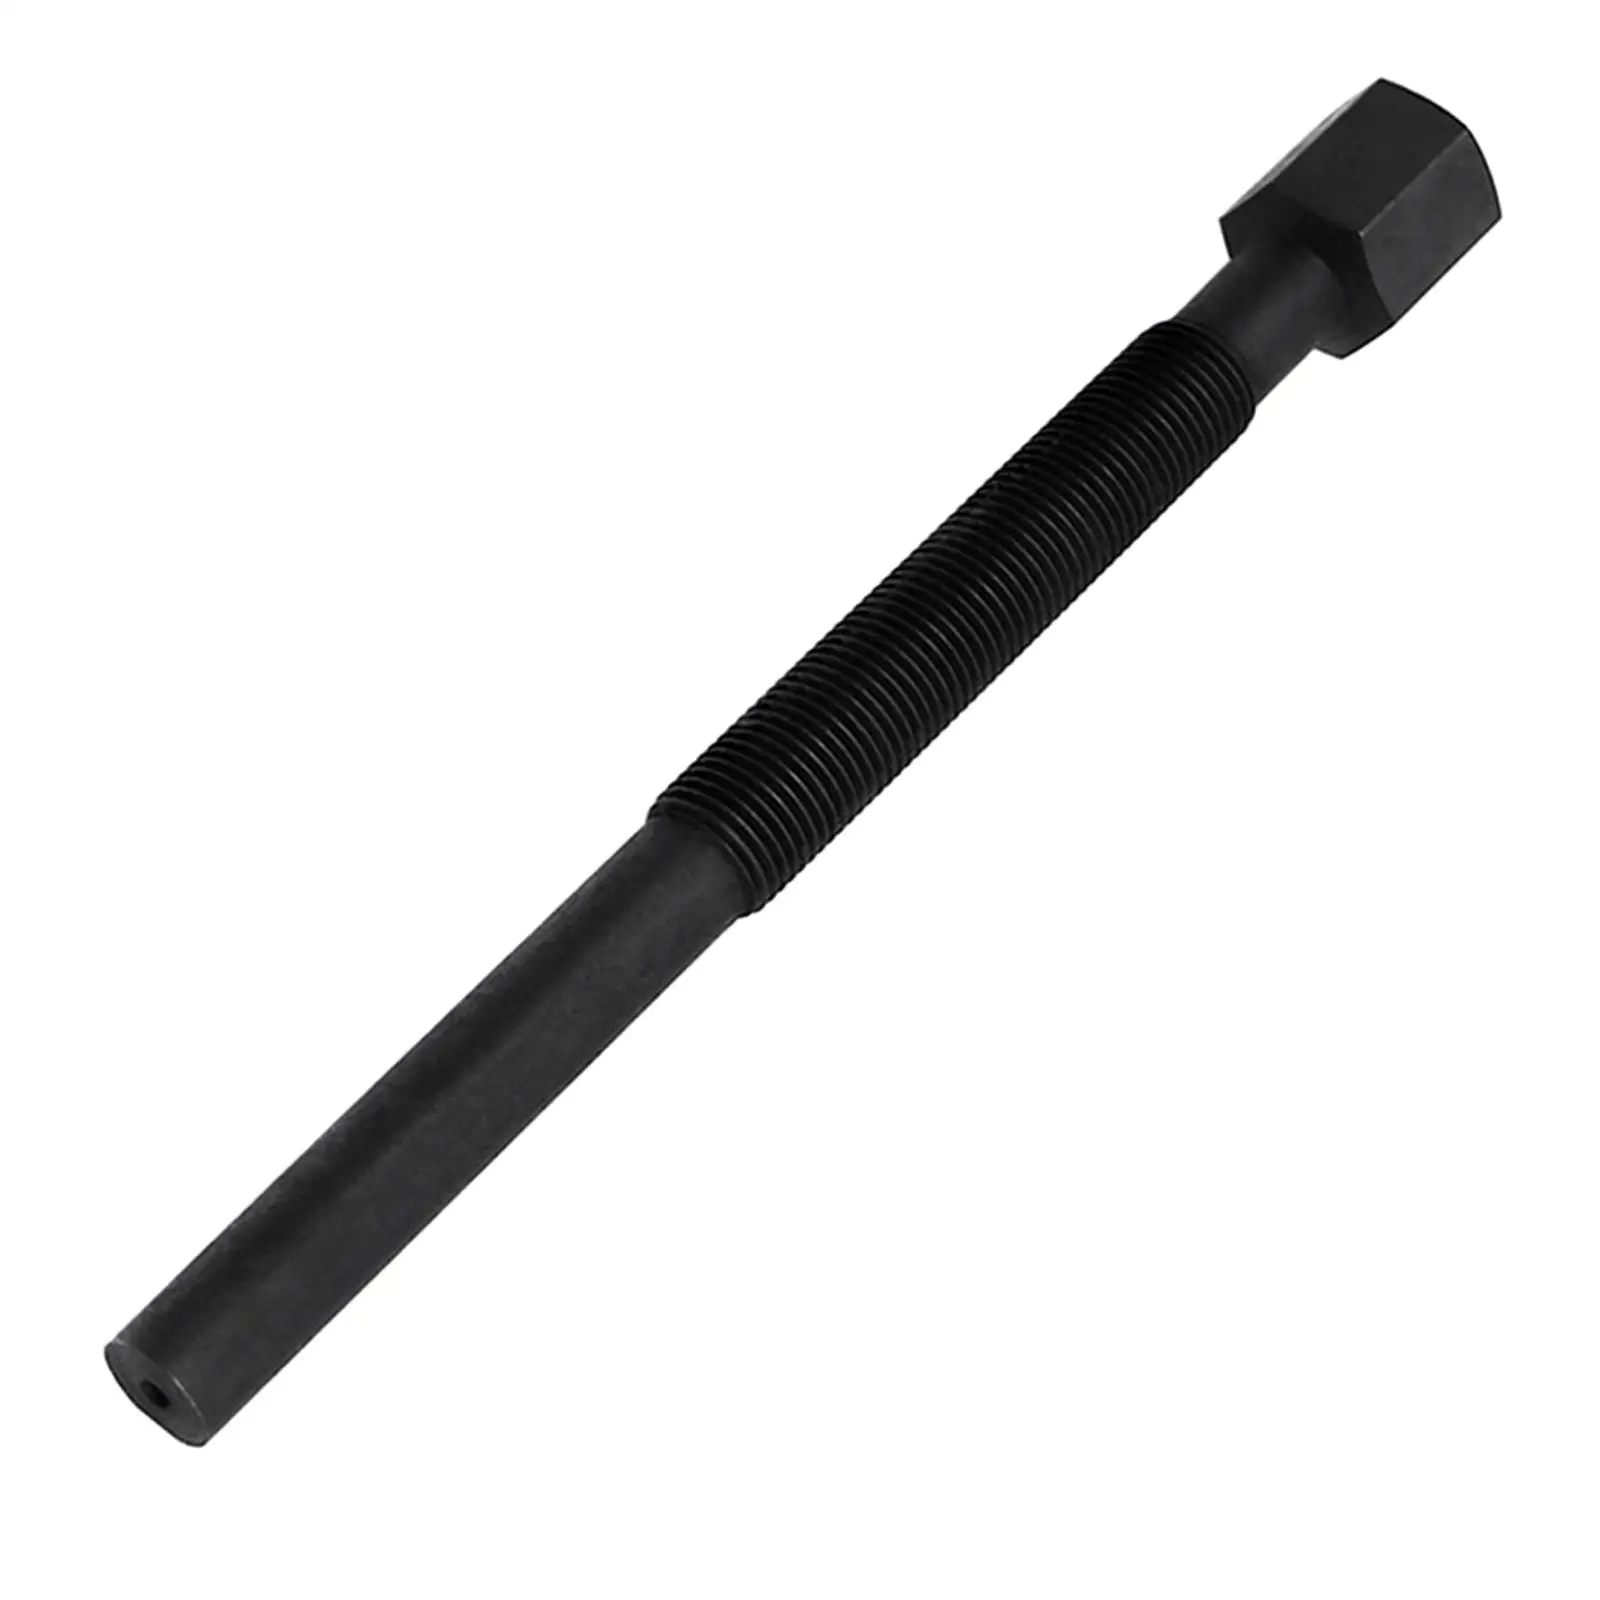 Clutch Puller Removal Tool Hardened Alignment Tools Black Clucth Puller for John Deere 620i 850D COMET Primarytx Replaces